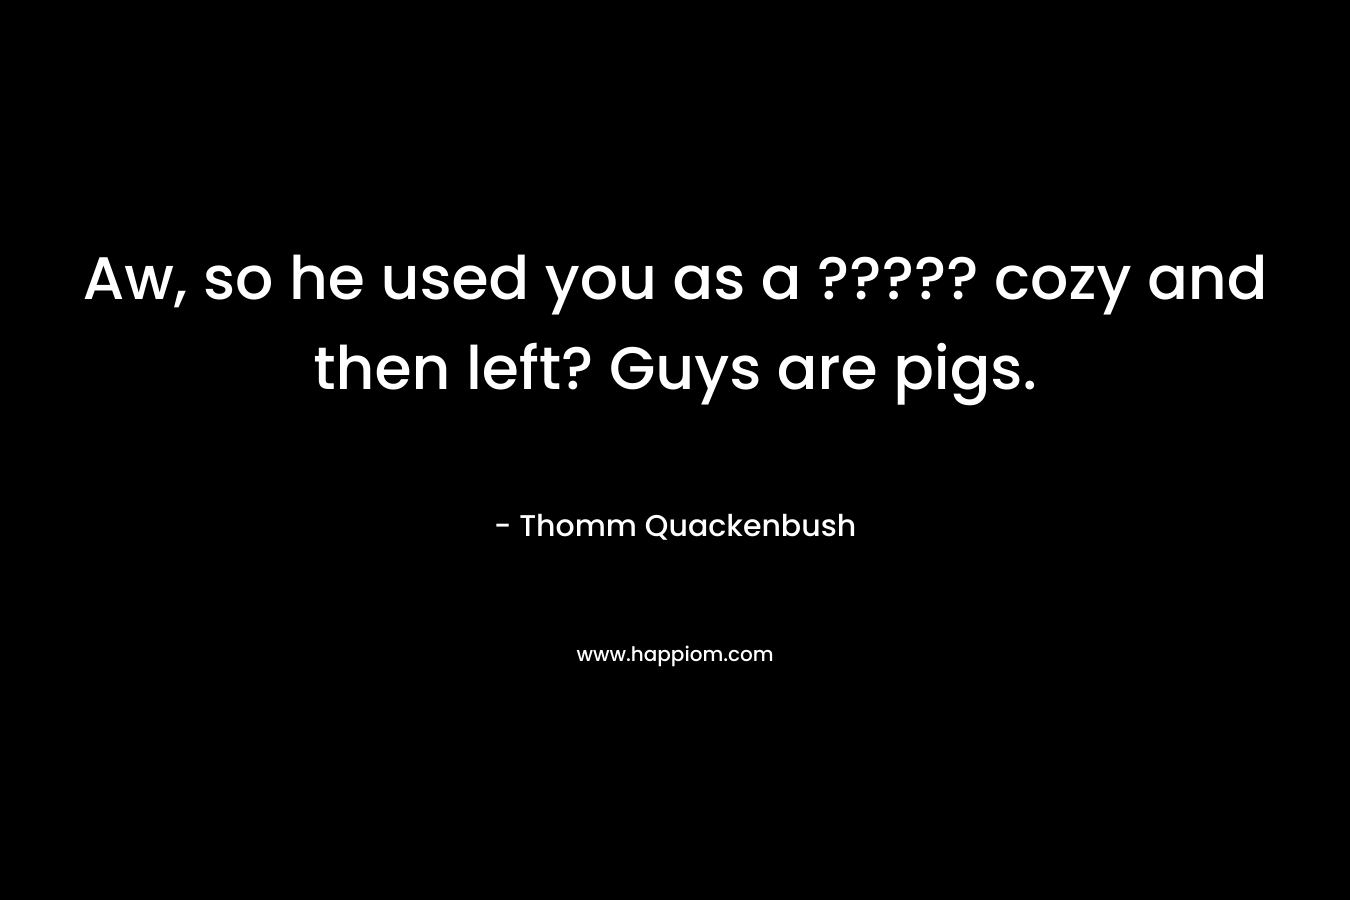 Aw, so he used you as a ????? cozy and then left? Guys are pigs. – Thomm Quackenbush